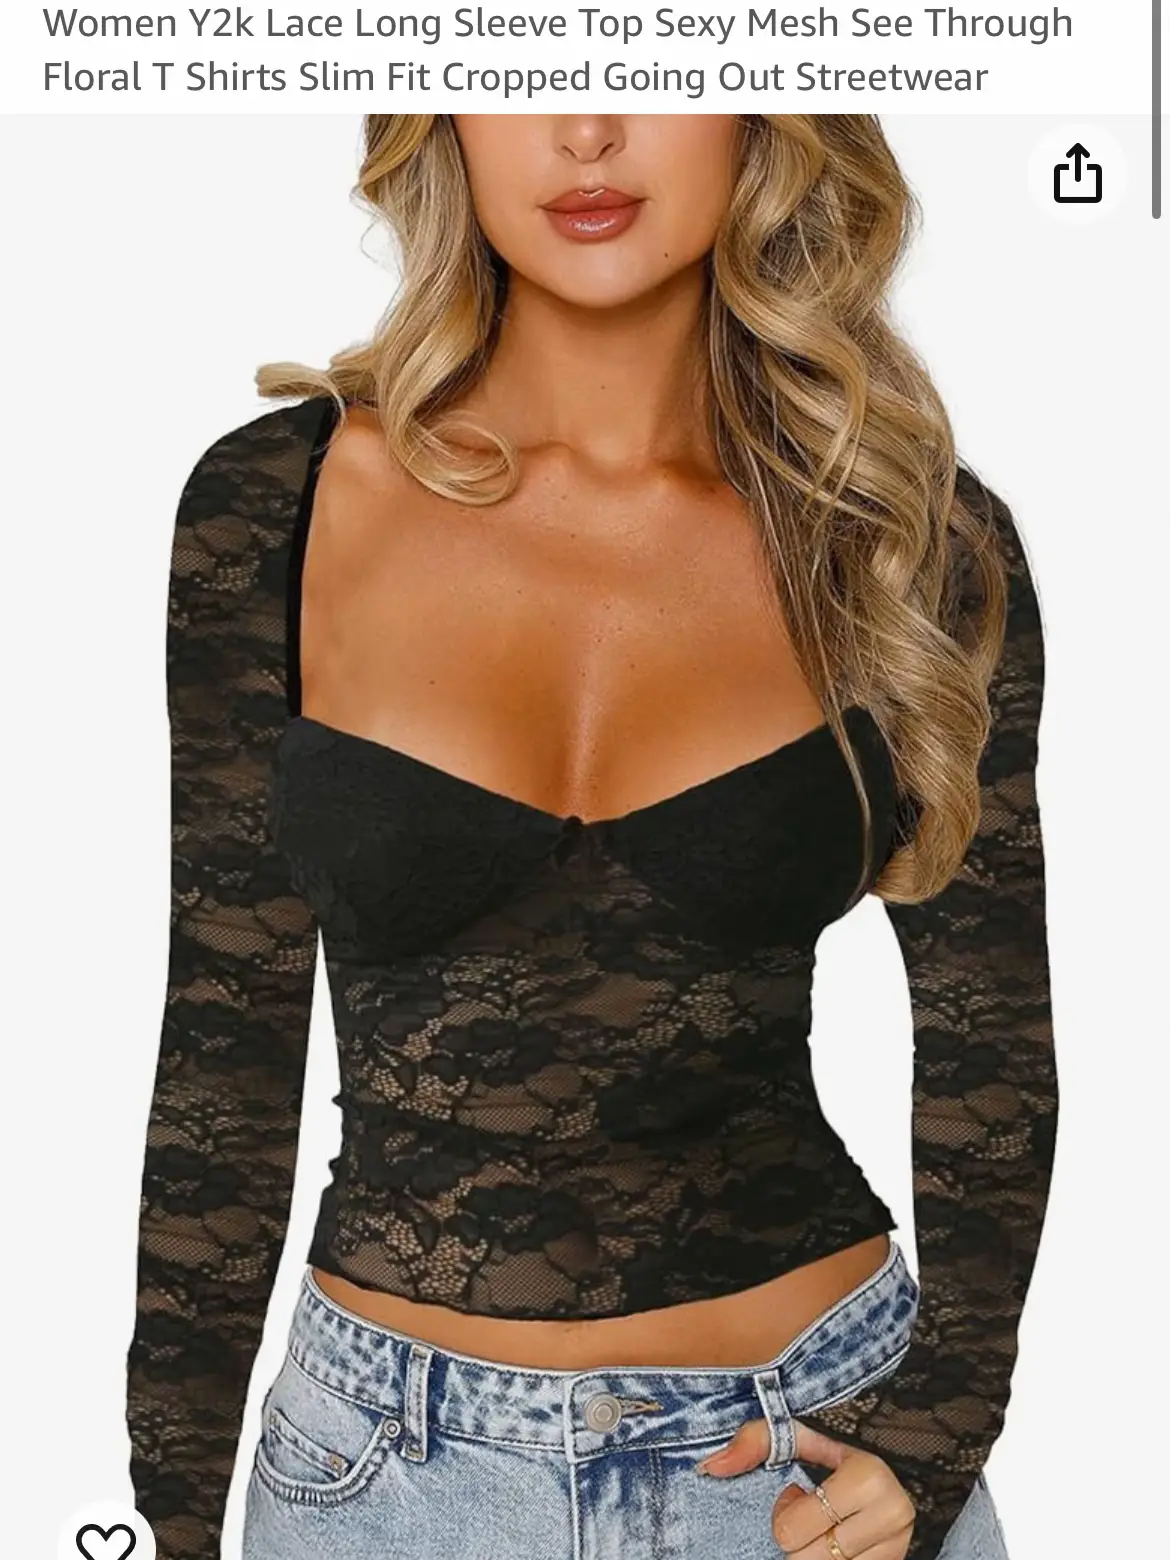 Mesh Top - Long Sleeve Mesh Top - Sexy Top - Going Out Top - Lulus